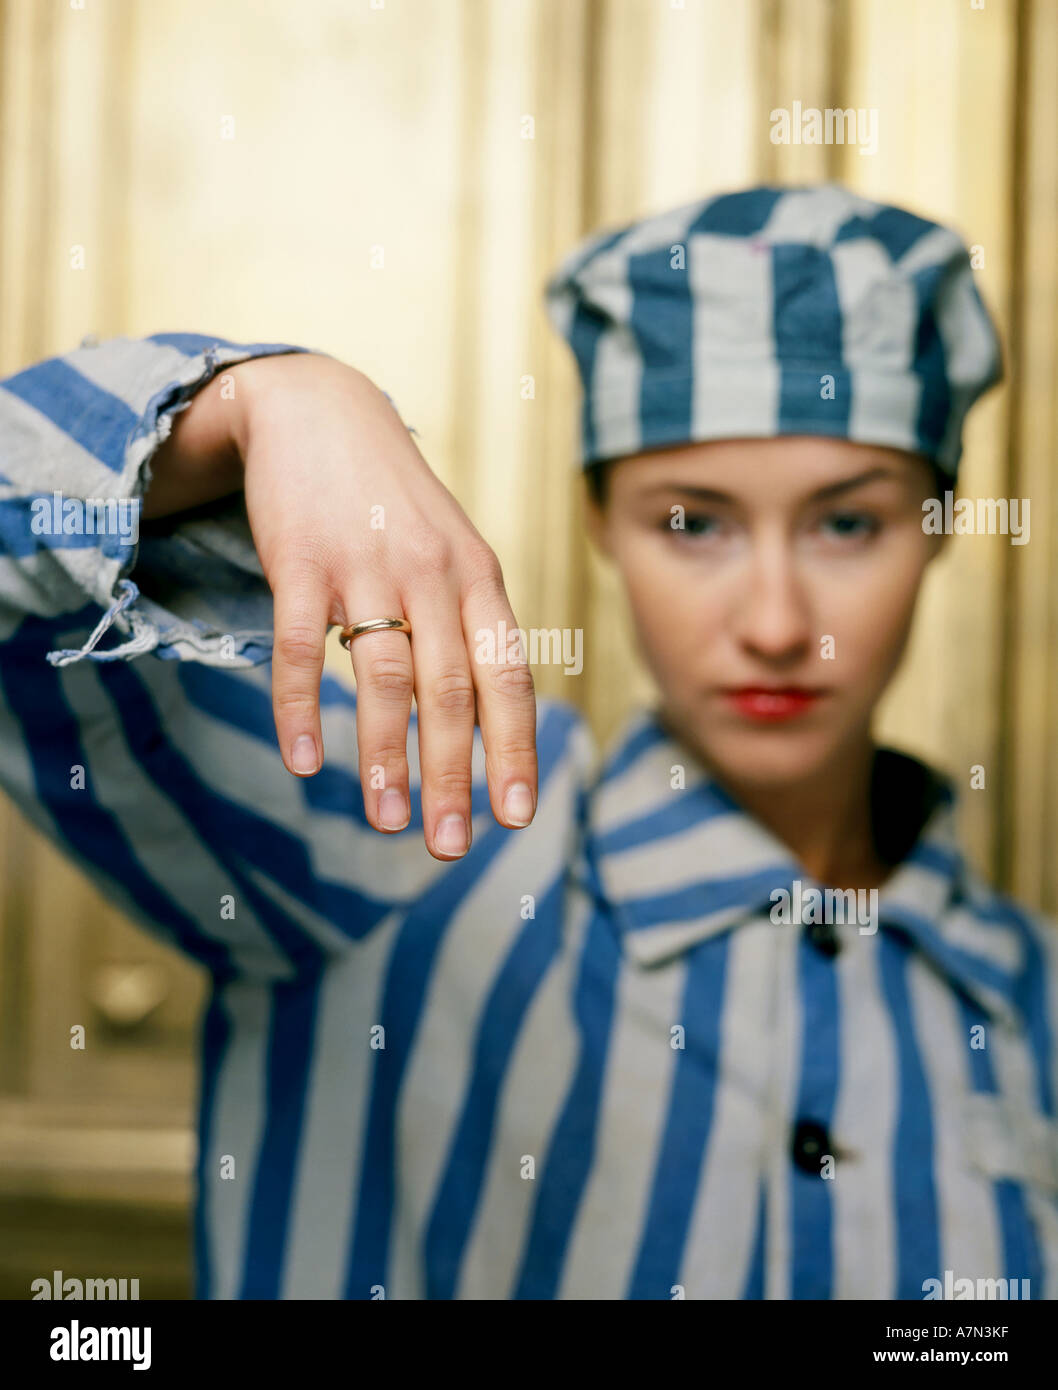 indoor studio woman young girl 20 25 dress attire jail prison shirt stripe stripes striped hat cap jewelery ring married wife Stock Photo